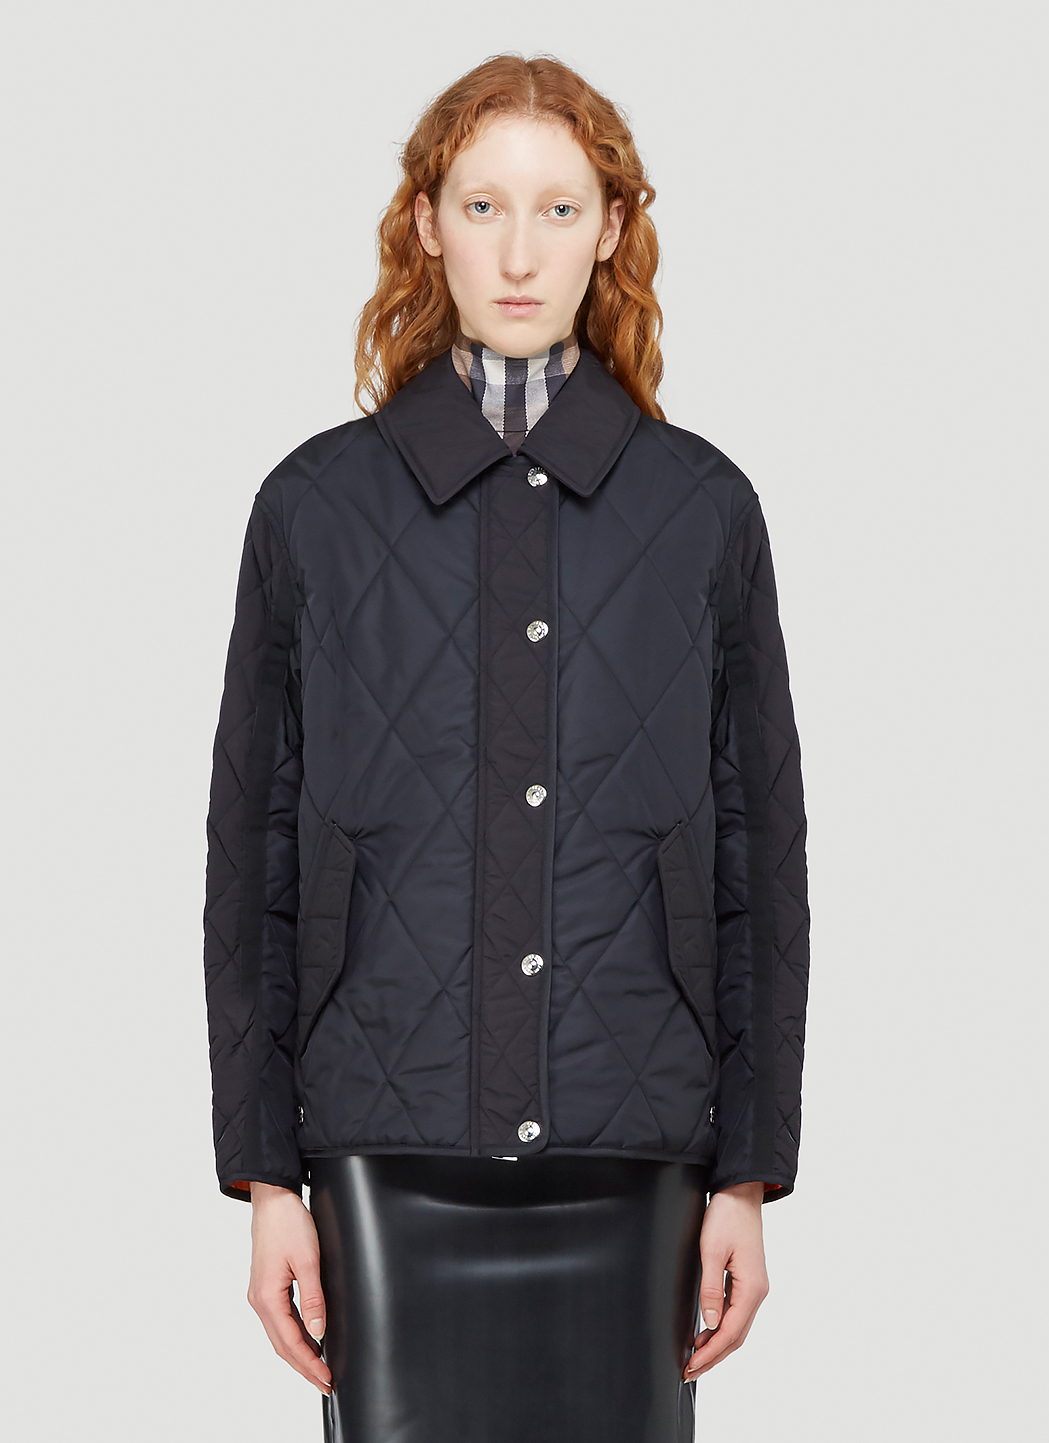 Burberry Lavenham Quilted Jacket in Black | LN-CC